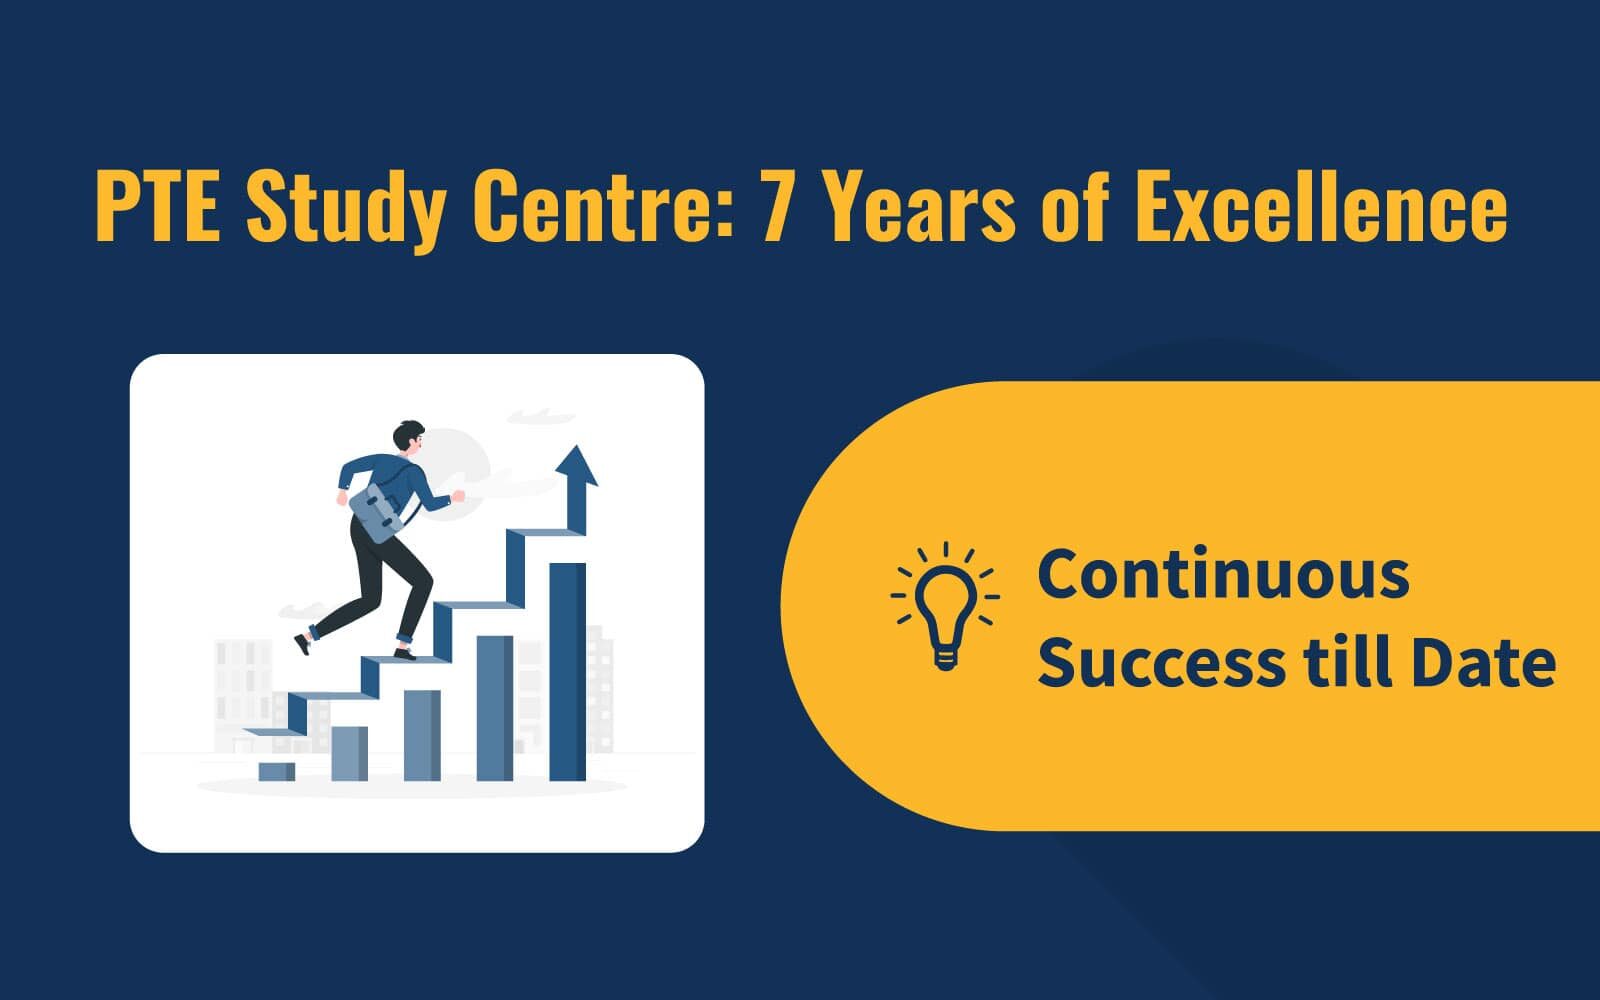 PTE Study Centre: 7 Years of Excellence